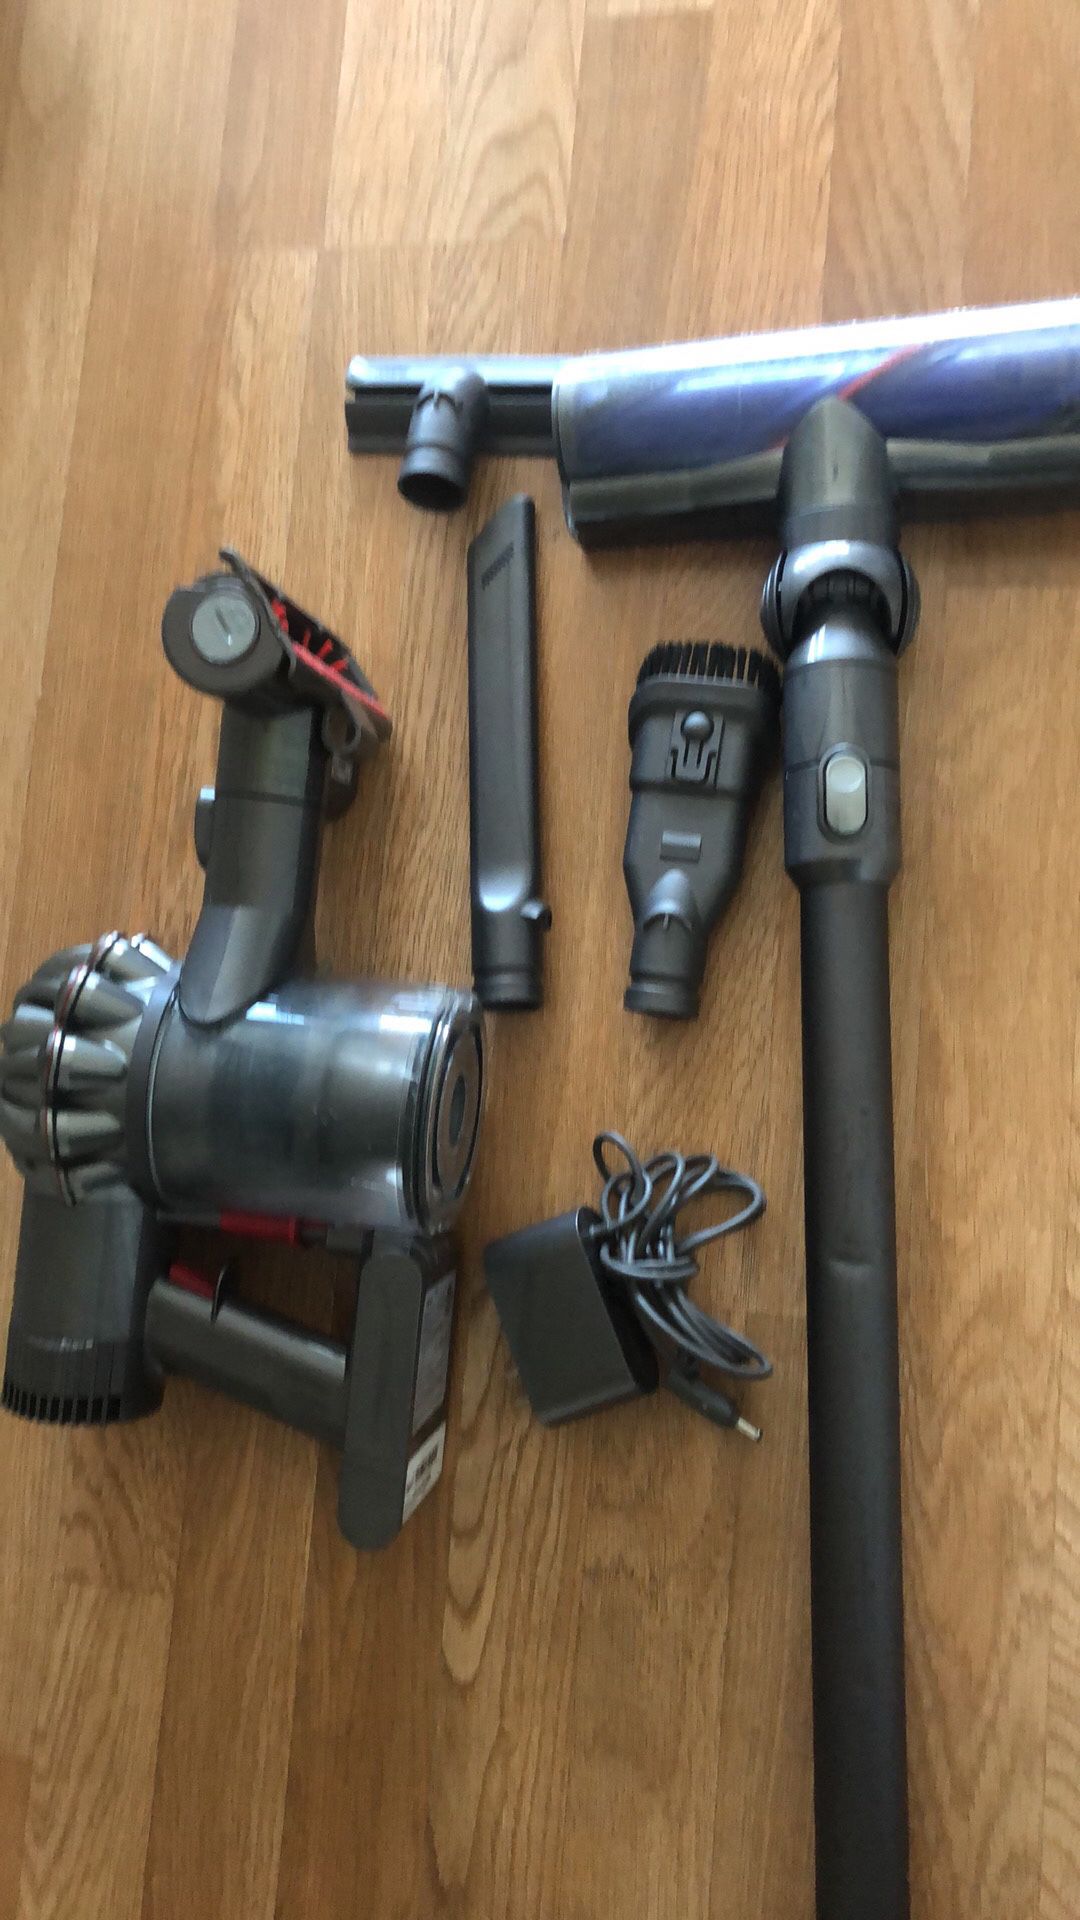 Dyson Vacuum Cleaner Cordless With Accessories Tested Working Perfect Excellent Condition Ready To Clean Up 